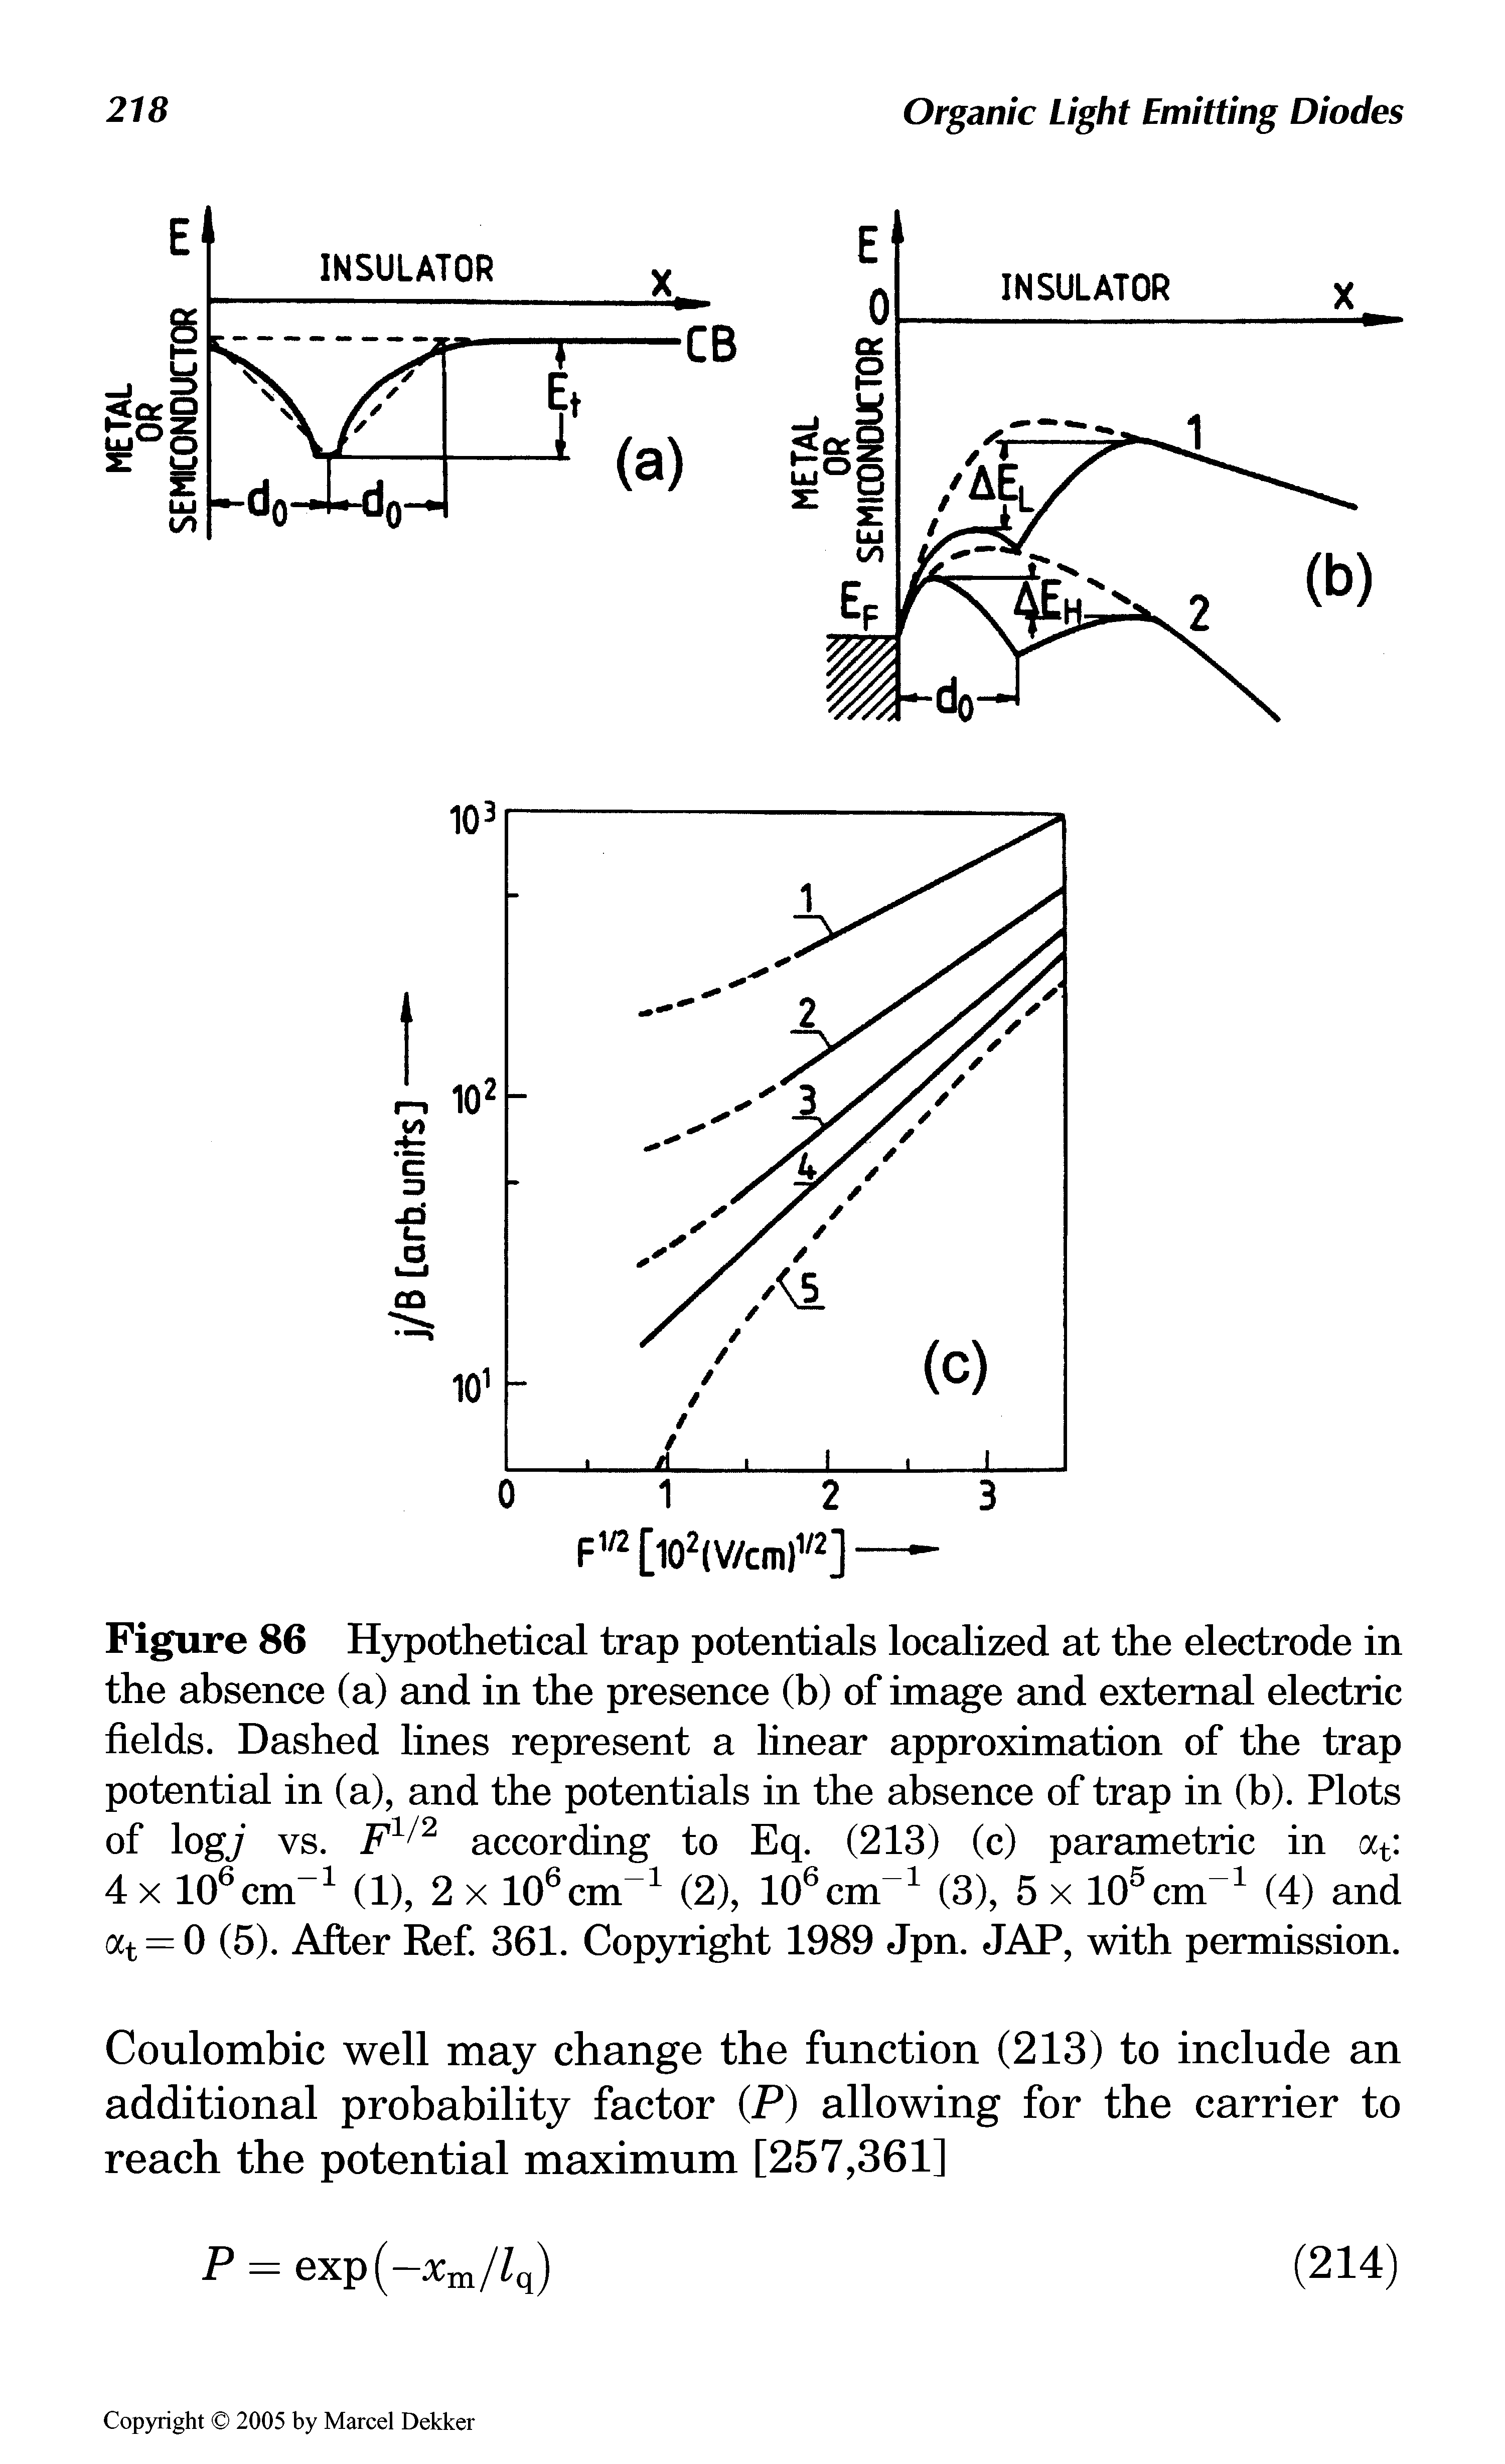 Figure 86 Hypothetical trap potentials localized at the electrode in the absence (a) and in the presence (b) of image and external electric fields. Dashed lines represent a linear approximation of the trap potential in (a), and the potentials in the absence of trap in (b). Plots of logj vs. F1/2 according to Eq. (213) (c) parametric in at 4 x 106 cm-1 (1), 2 x 106 cm-1 (2), K cnT1 (3), 5 x K cnT1 (4) and at = 0 (5). After Ref. 361. Copyright 1989 Jpn. JAP, with permission.